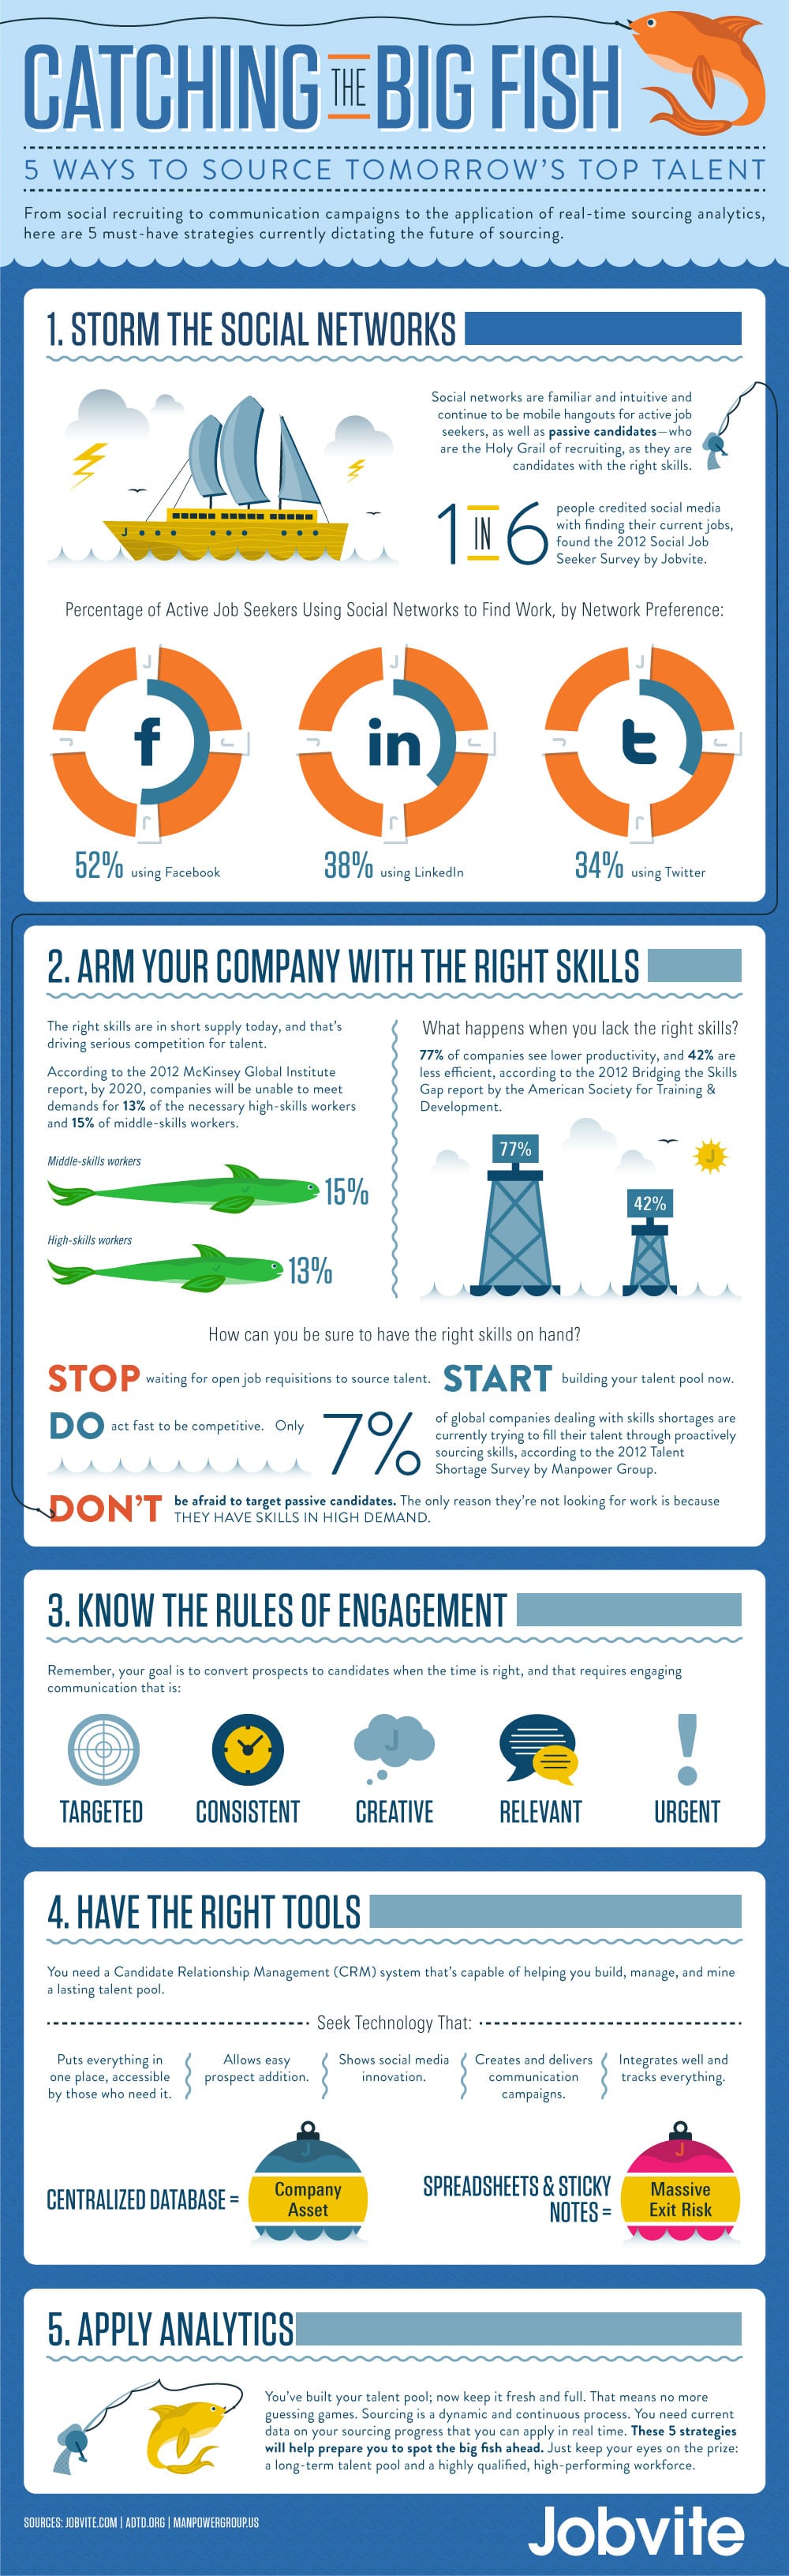 social-recruiting-top-talent-infographic